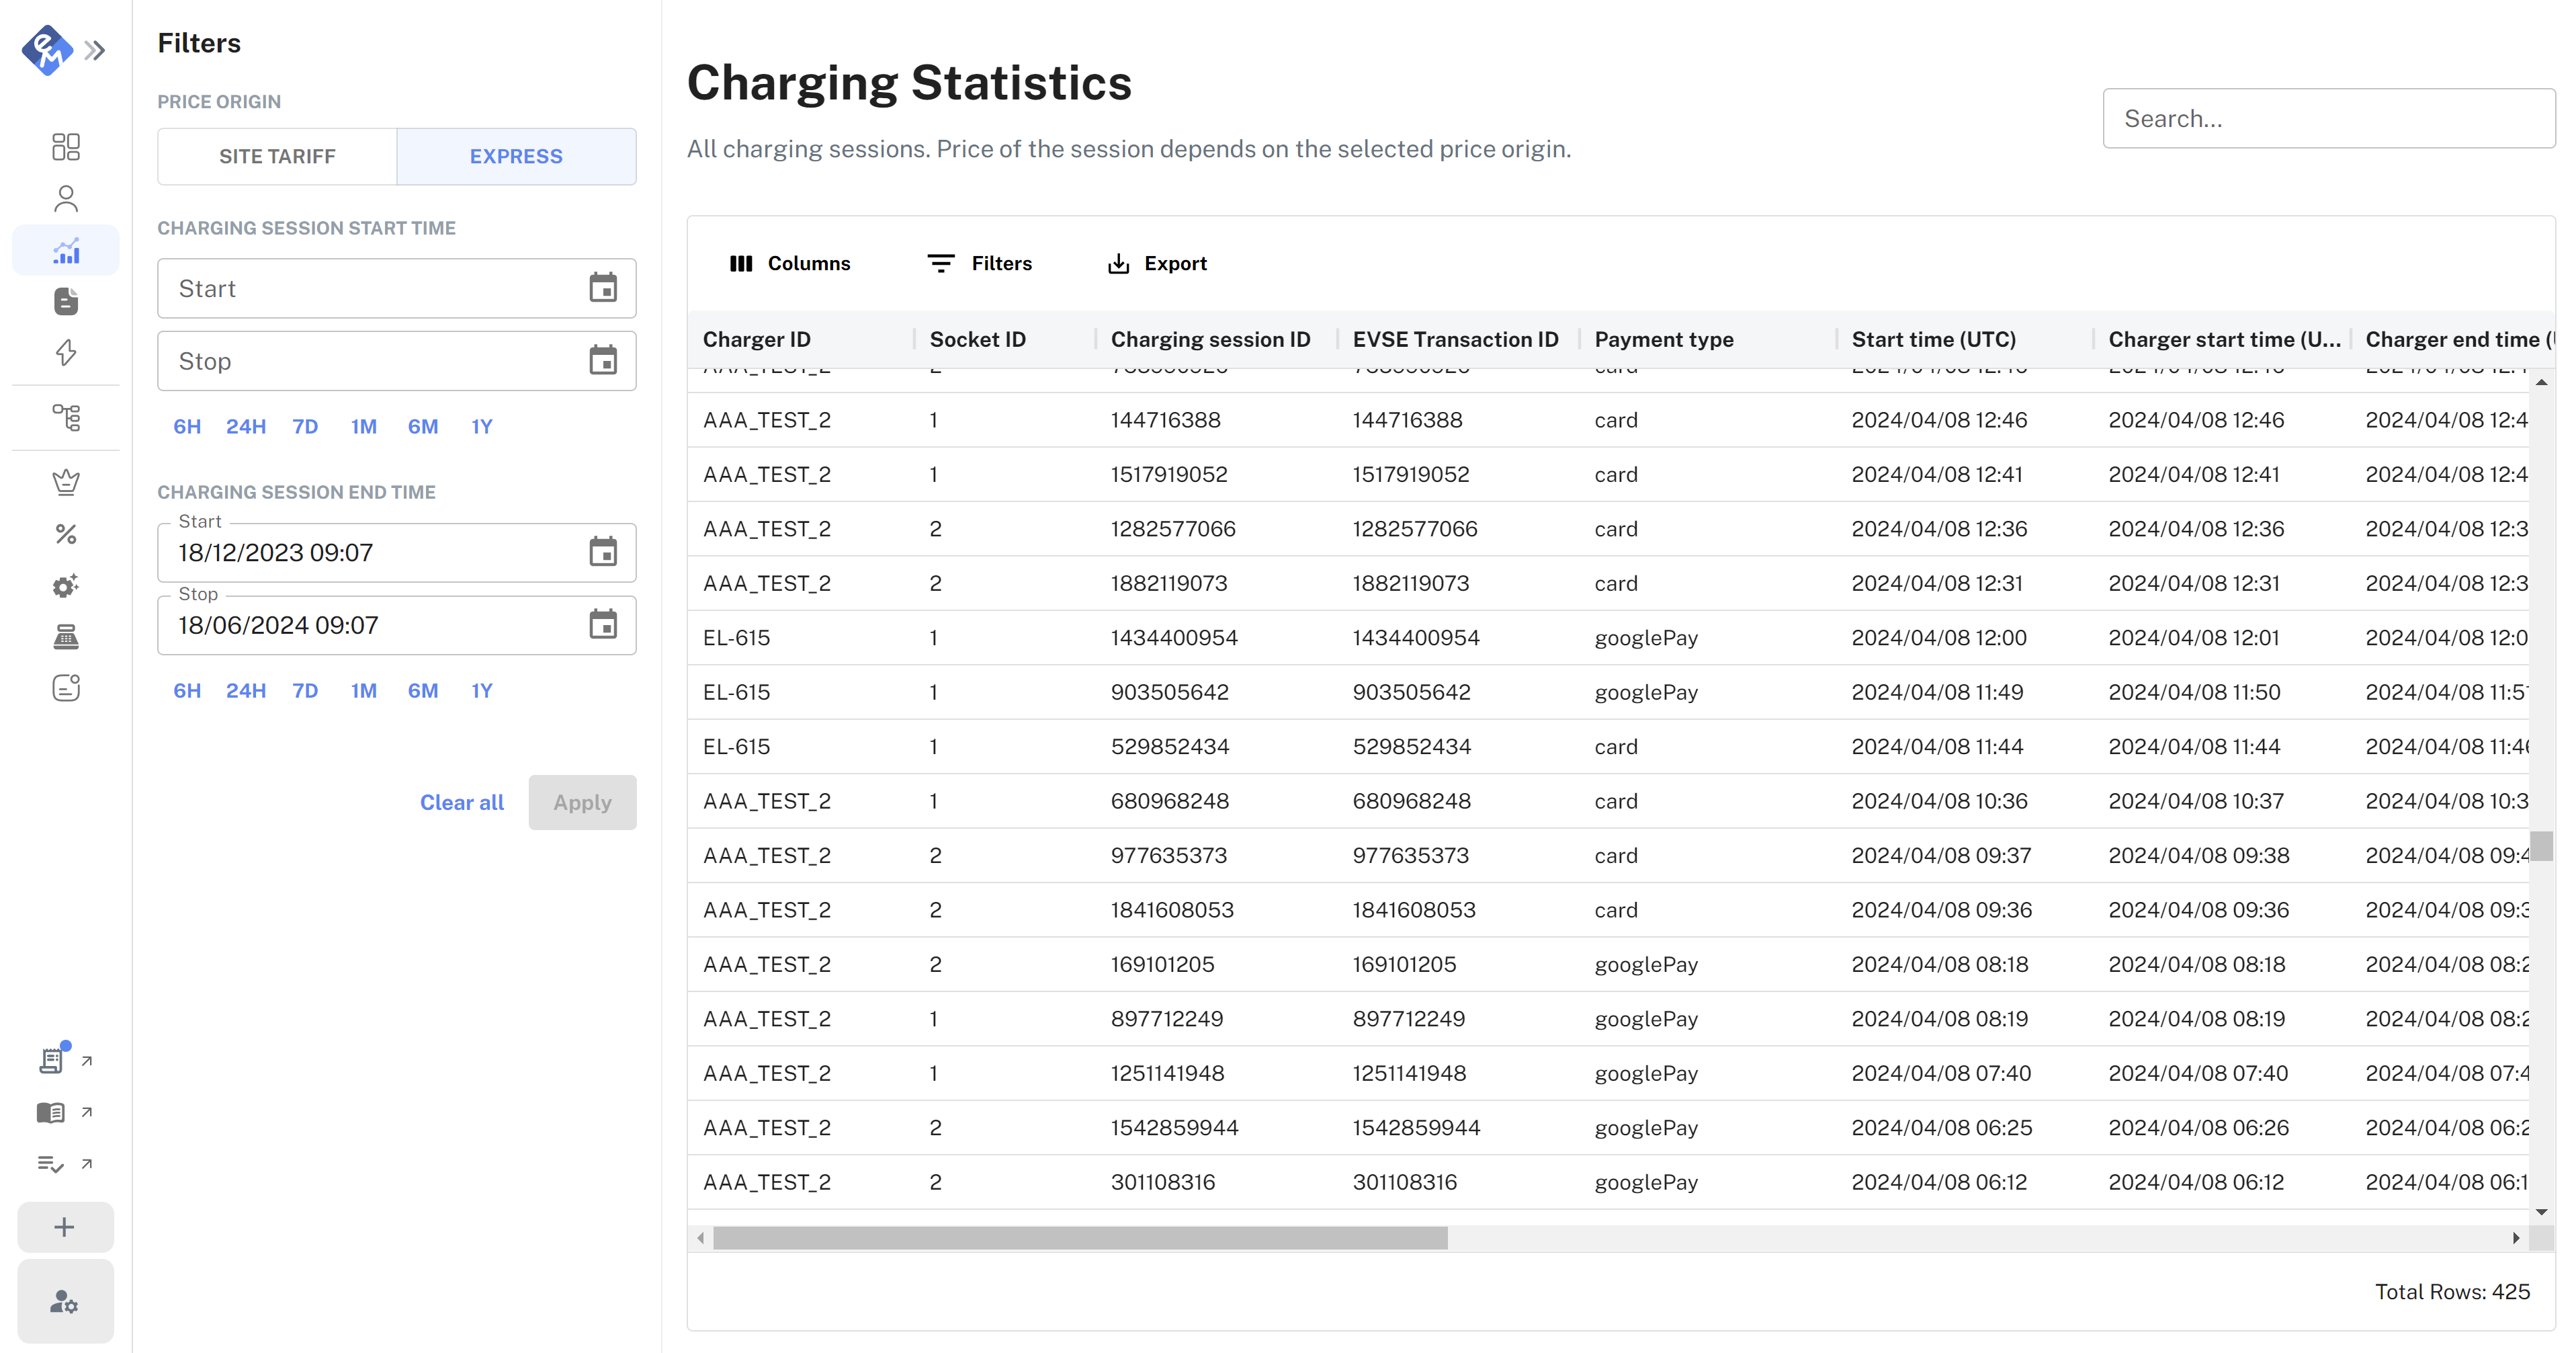 Express sessions available in Charging Statistics